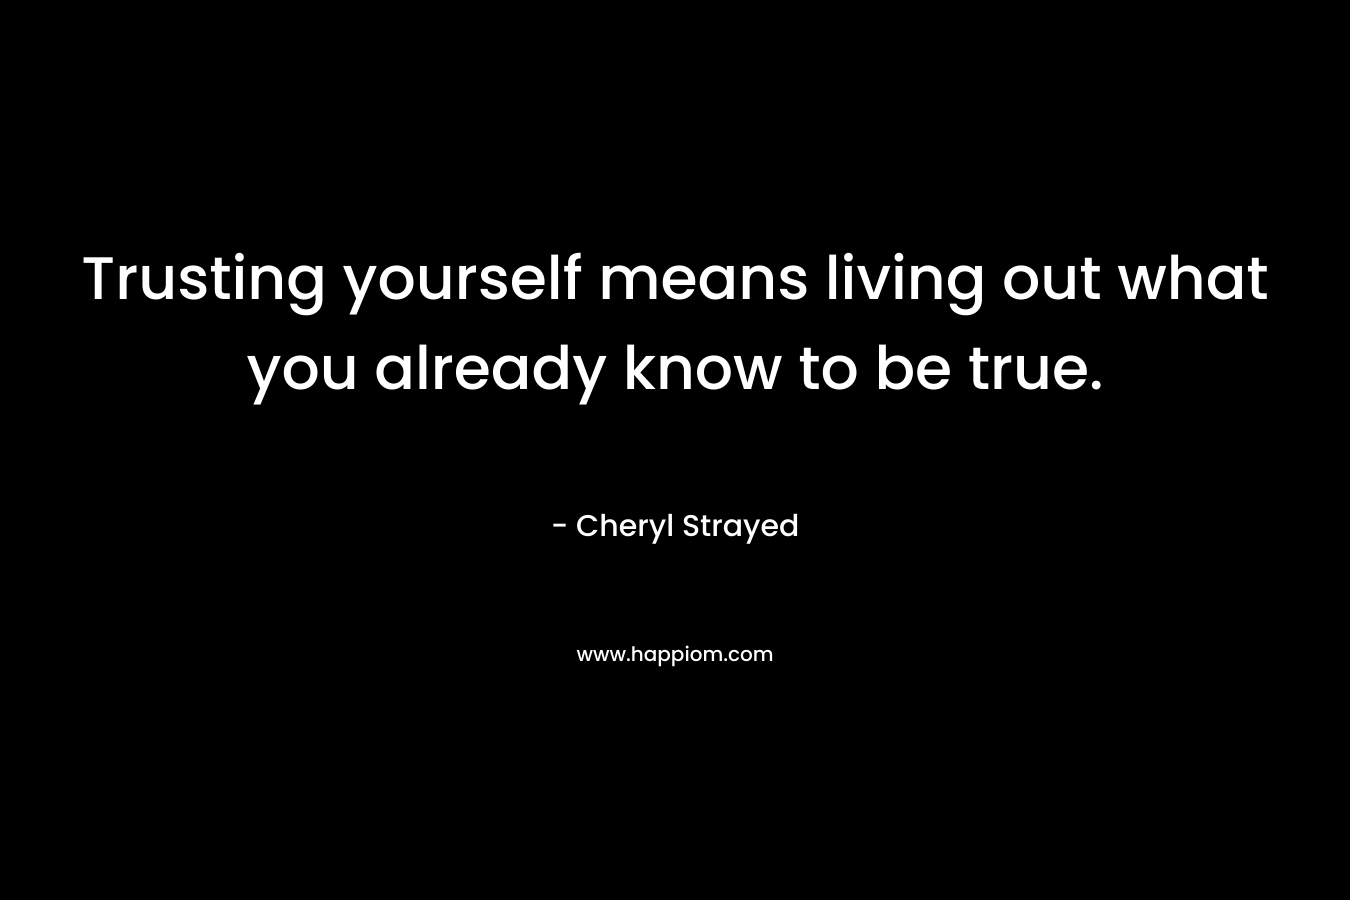 Trusting yourself means living out what you already know to be true. – Cheryl Strayed